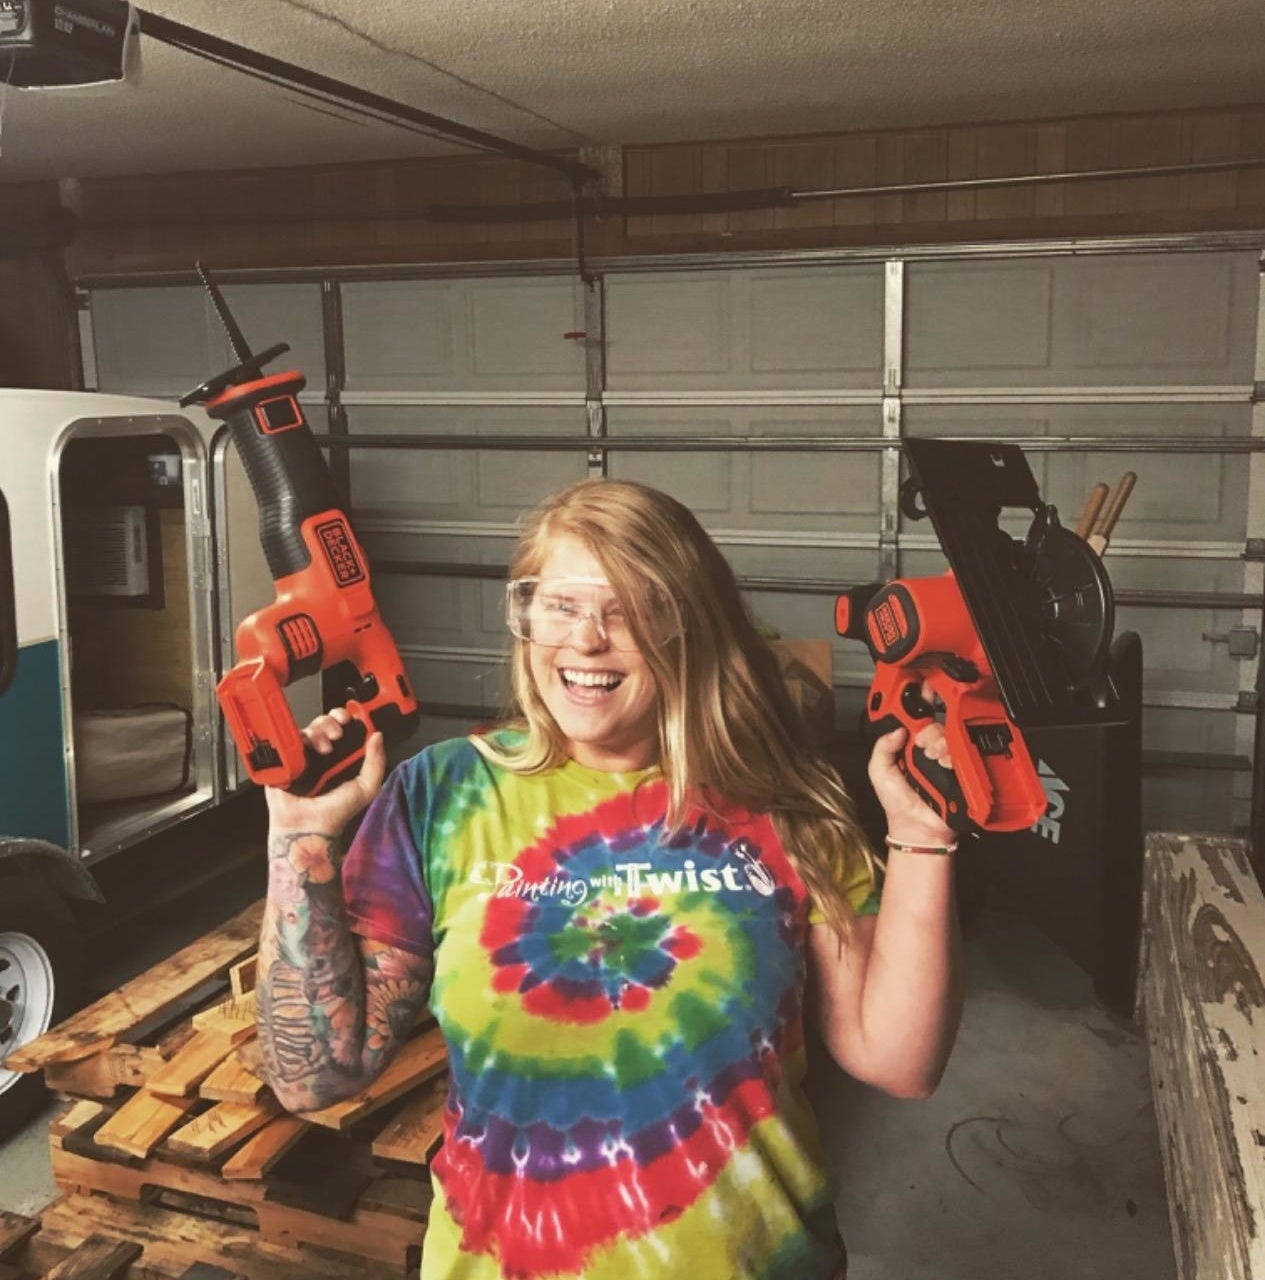 Reviewer is holding two power tools in each hand while smiling